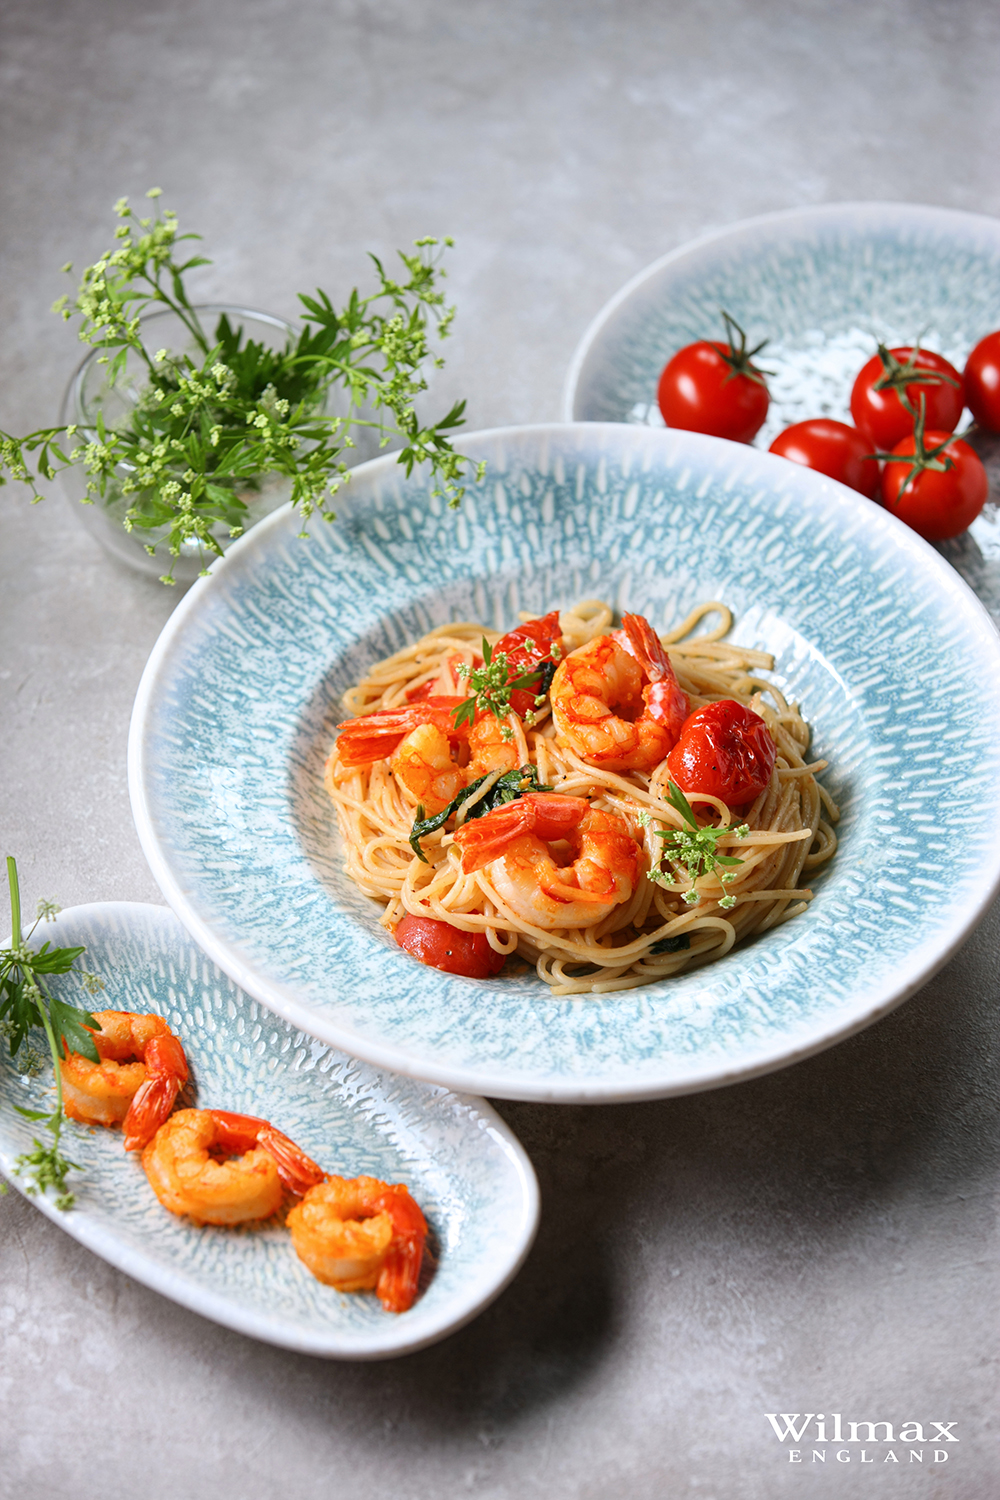 Spaghetti with Tomatoes and Shrimps